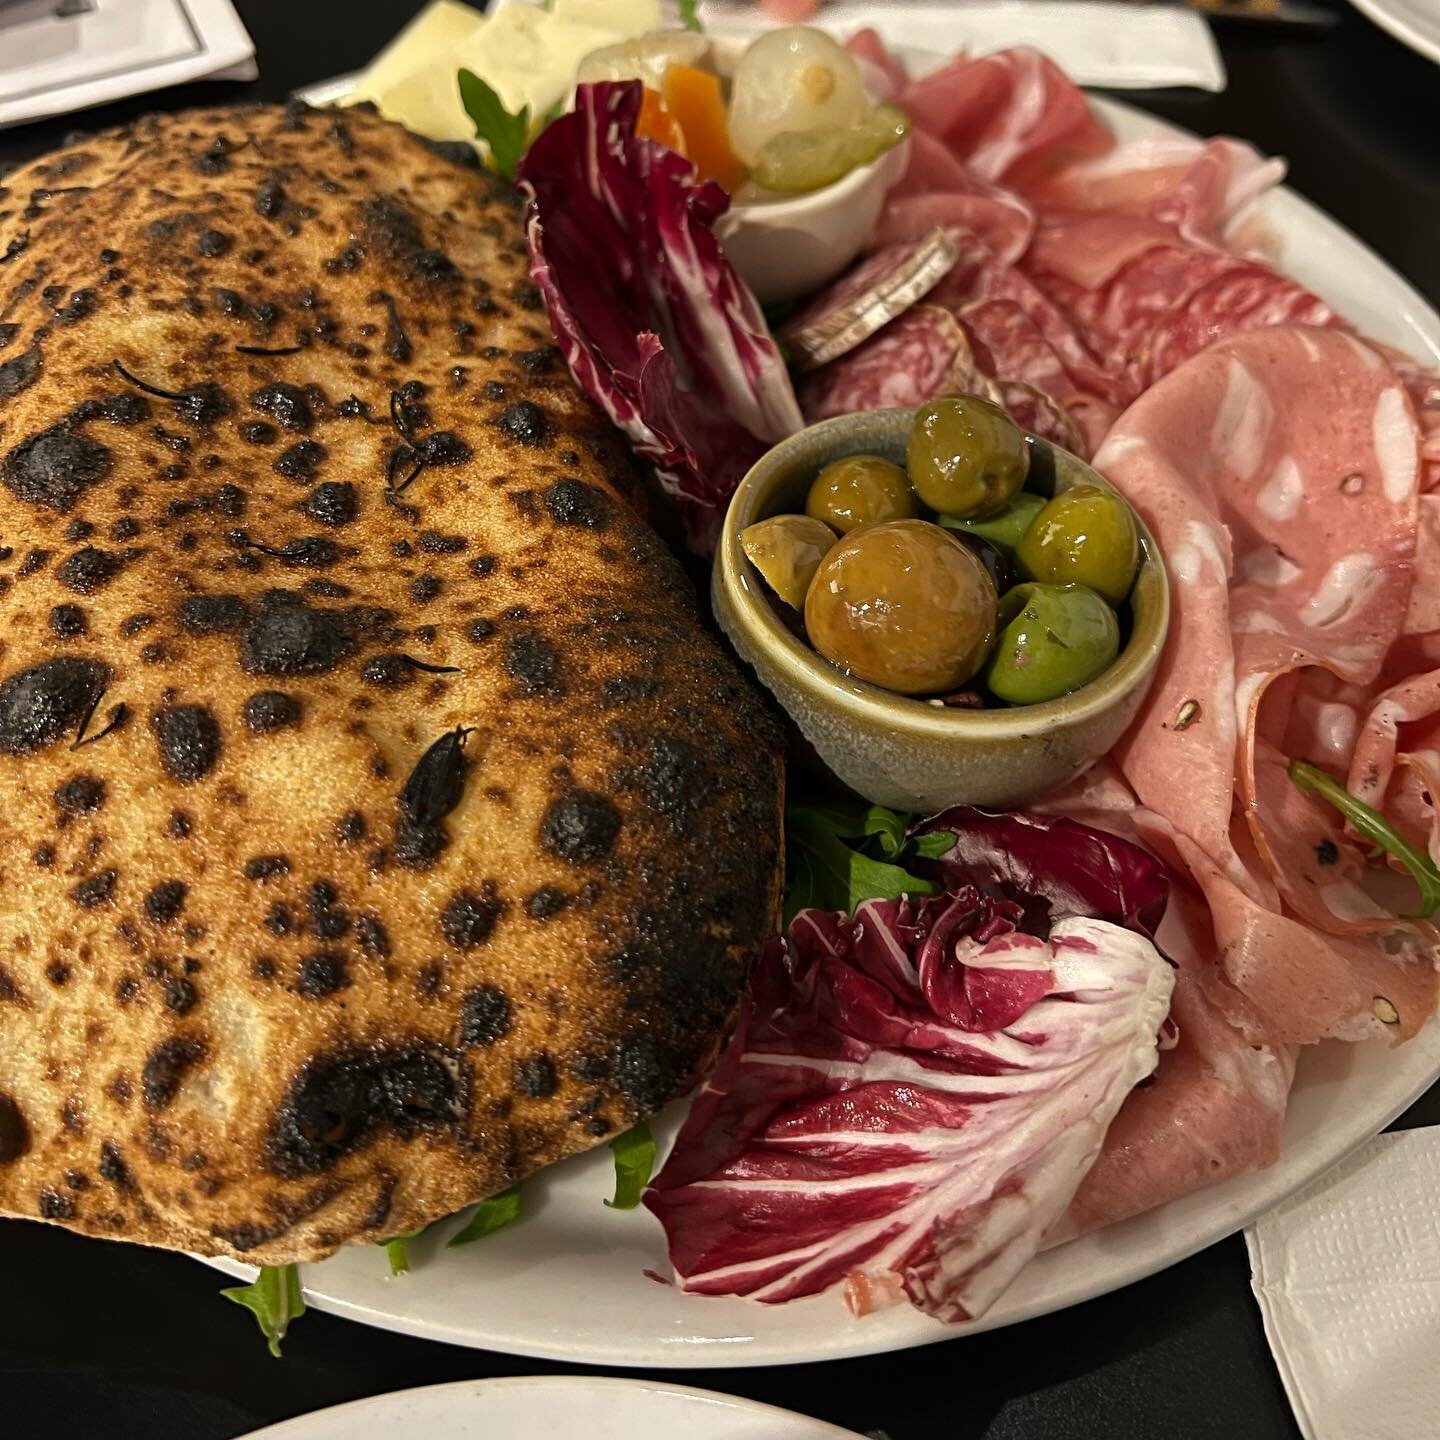 Charcuterie share plate, Asiago cheese, pickles, olives, and our homemade wood fired ciabatta bread - what better way to start your weekend? #sharefood #pizzeriavioletta

Let us know if you prefer our  cosy outdoor seating with heaters when you book.